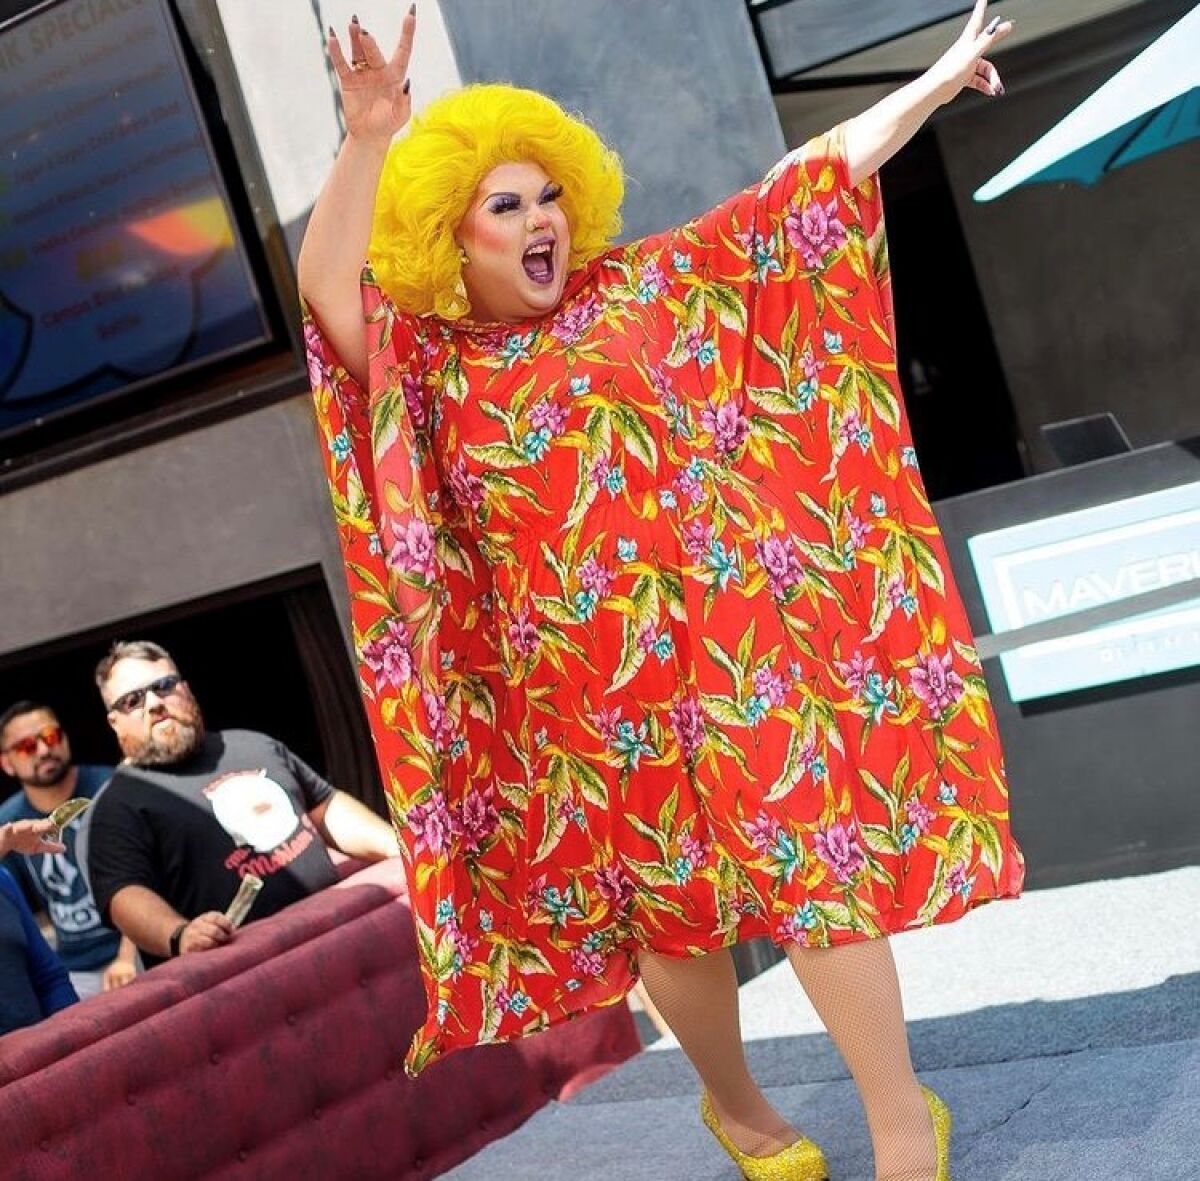 Dating Is A DRAG: Valentine’s Day Drag Show and Dating Game at Mavericks Beach Club.